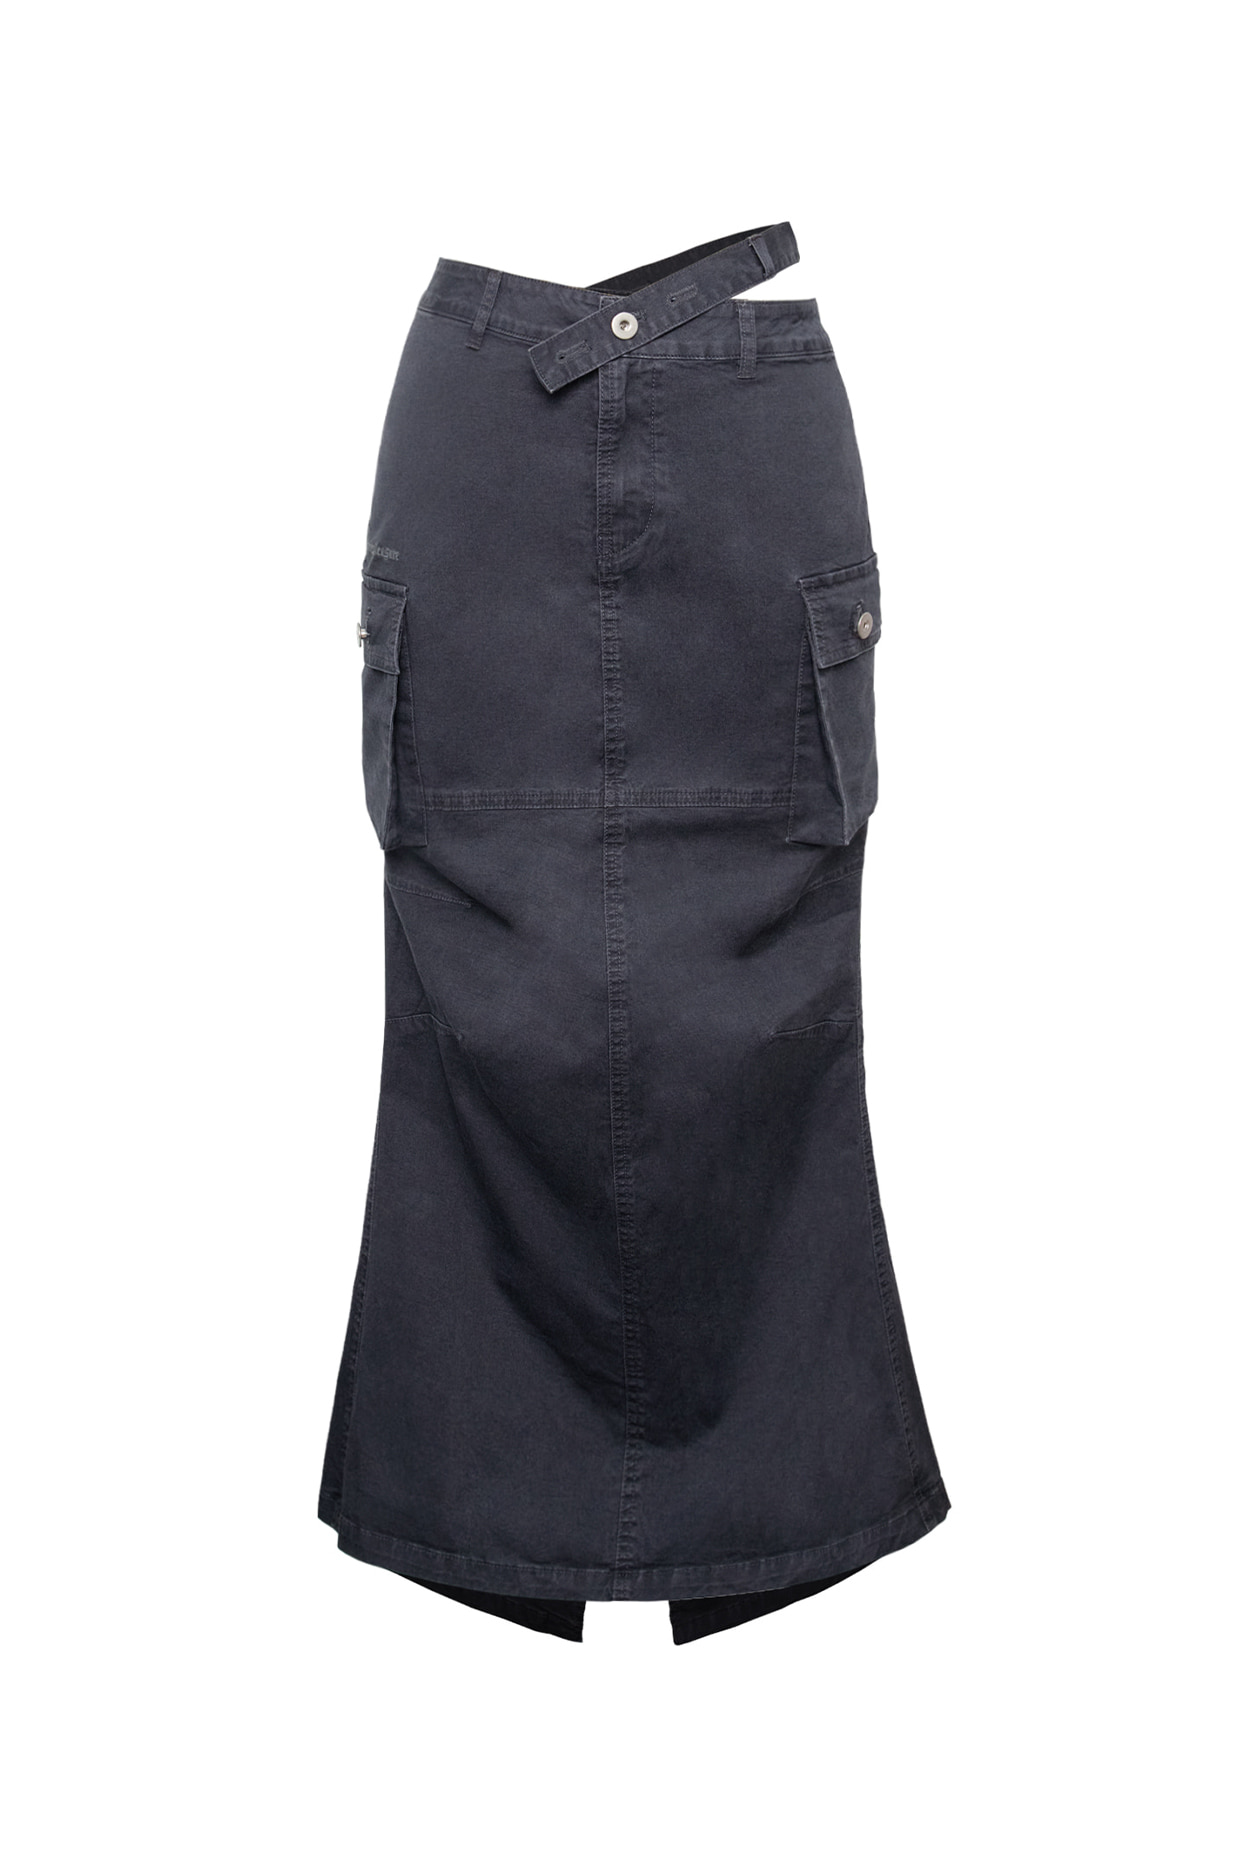 NIX CARGO SKIRT charcoal [4.3 pre-order delivery]